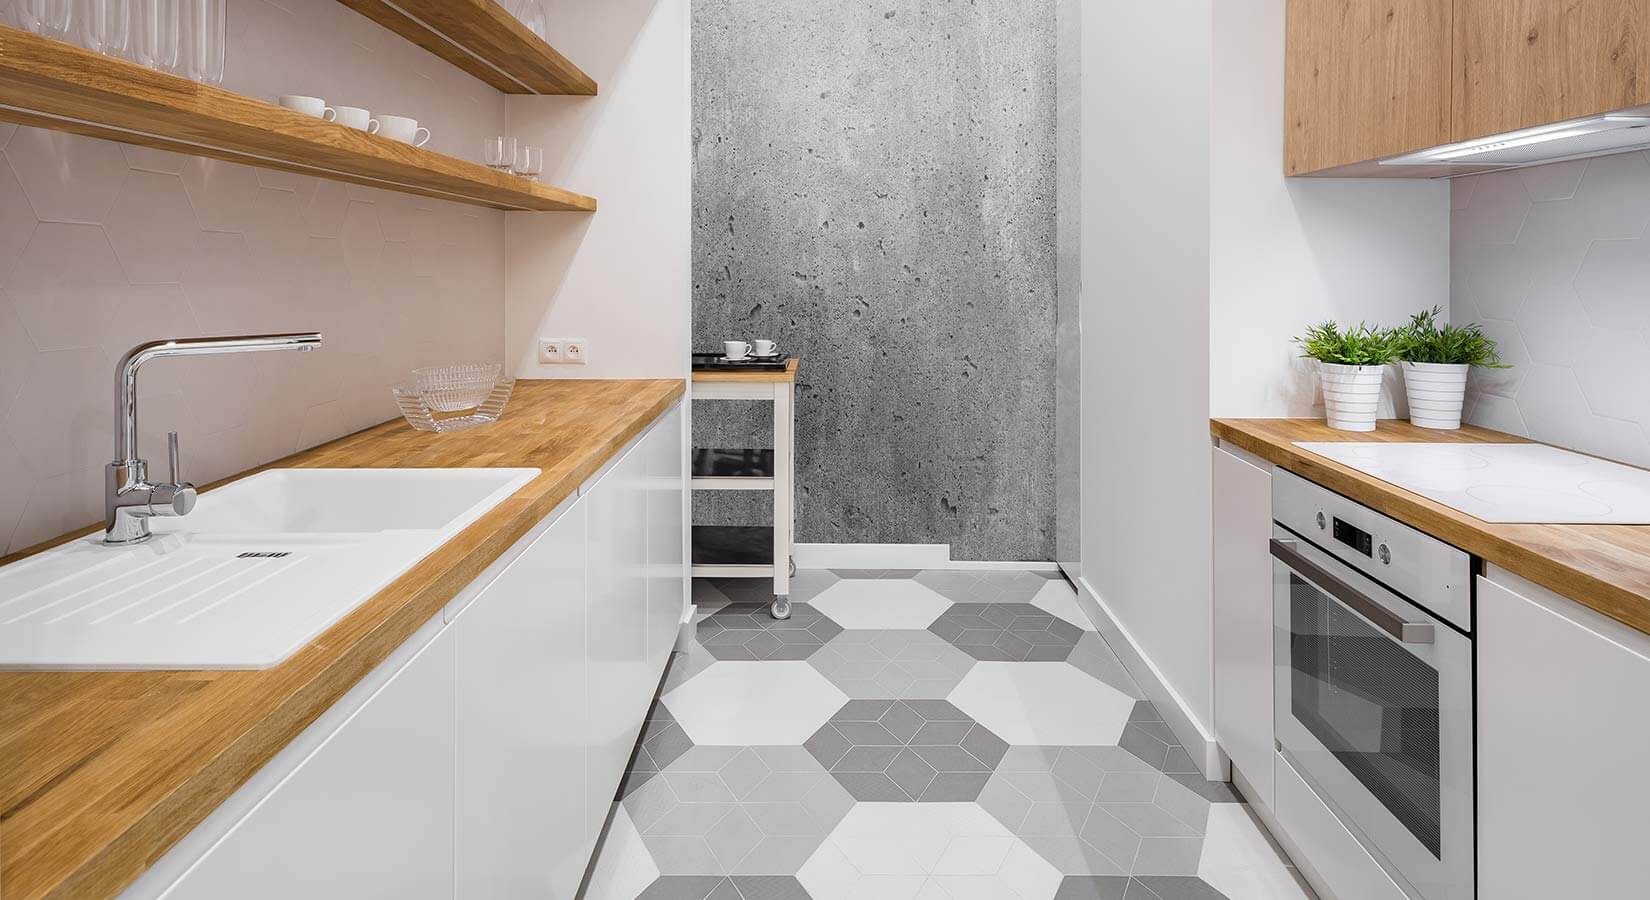 Small galley kitchen with white cabinets, wood countertop, and gray and white patterned floor tile.